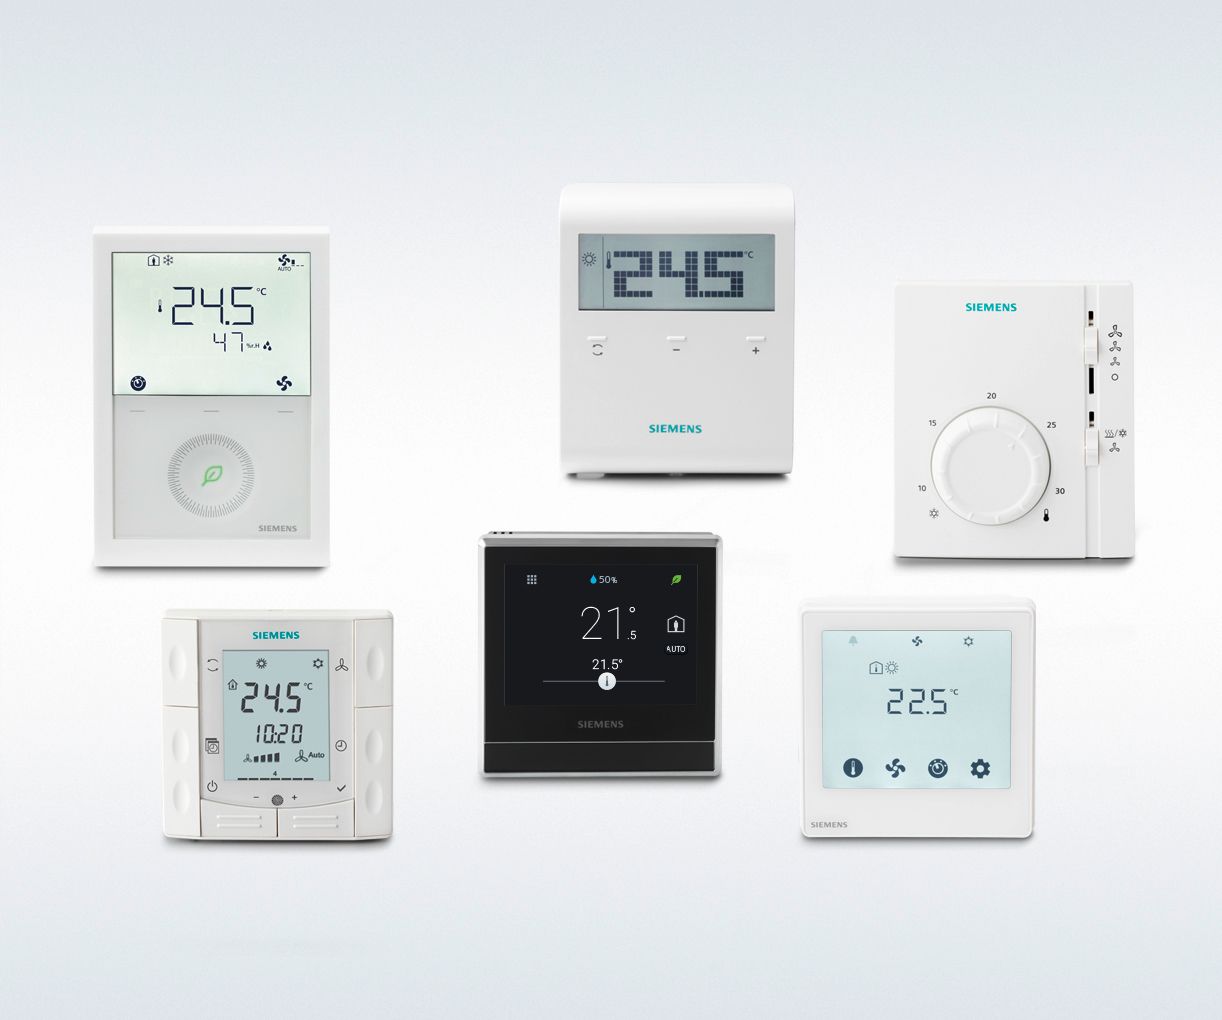 https://assets.new.siemens.com/siemens/assets/api/uuid:95e60721-3e90-4988-9f02-0cf8e791ef9f/operation:download/thermostat-family-picture-2020.jpg